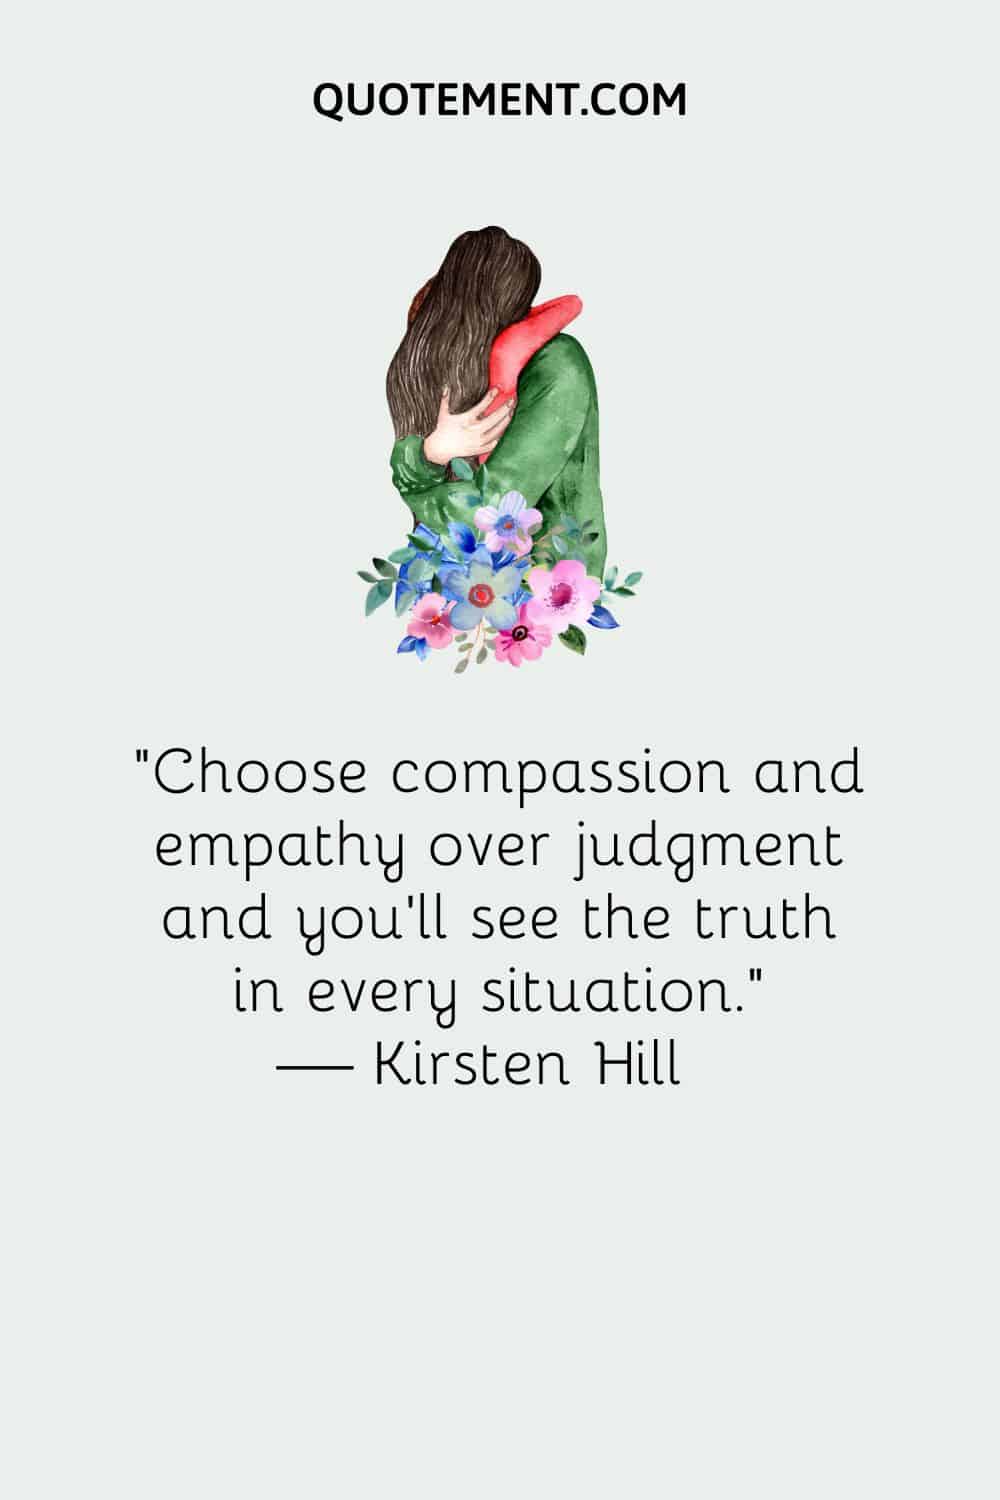 Choose compassion and empathy over judgment and you’ll see the truth in every situation